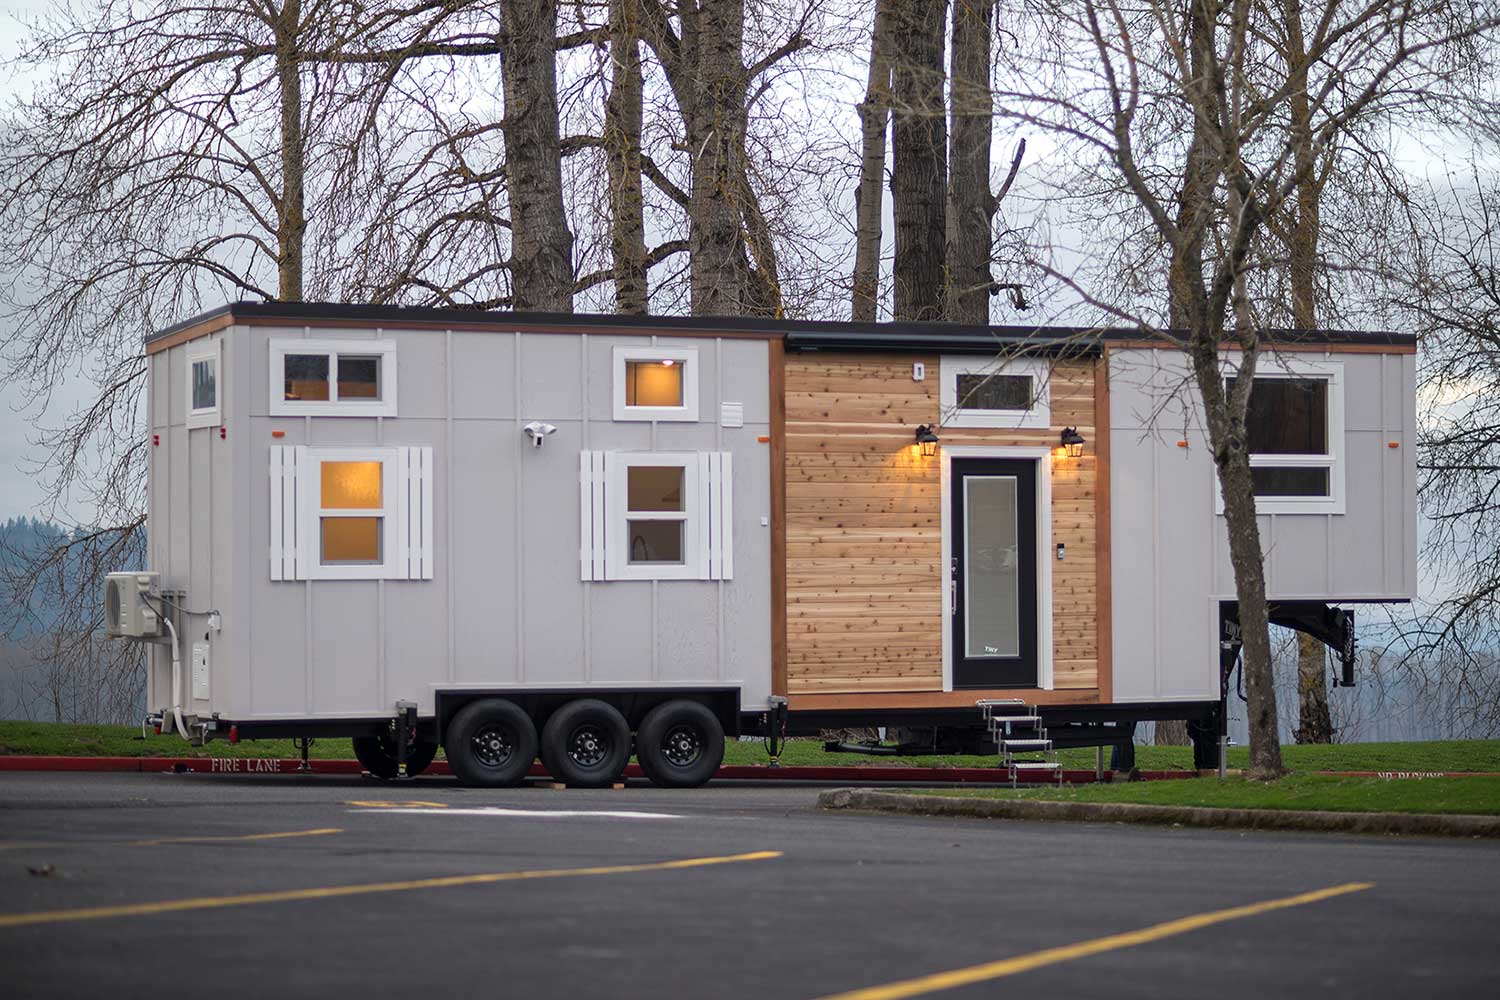 The Kingston custom tiny house - outside shot with trees in the background